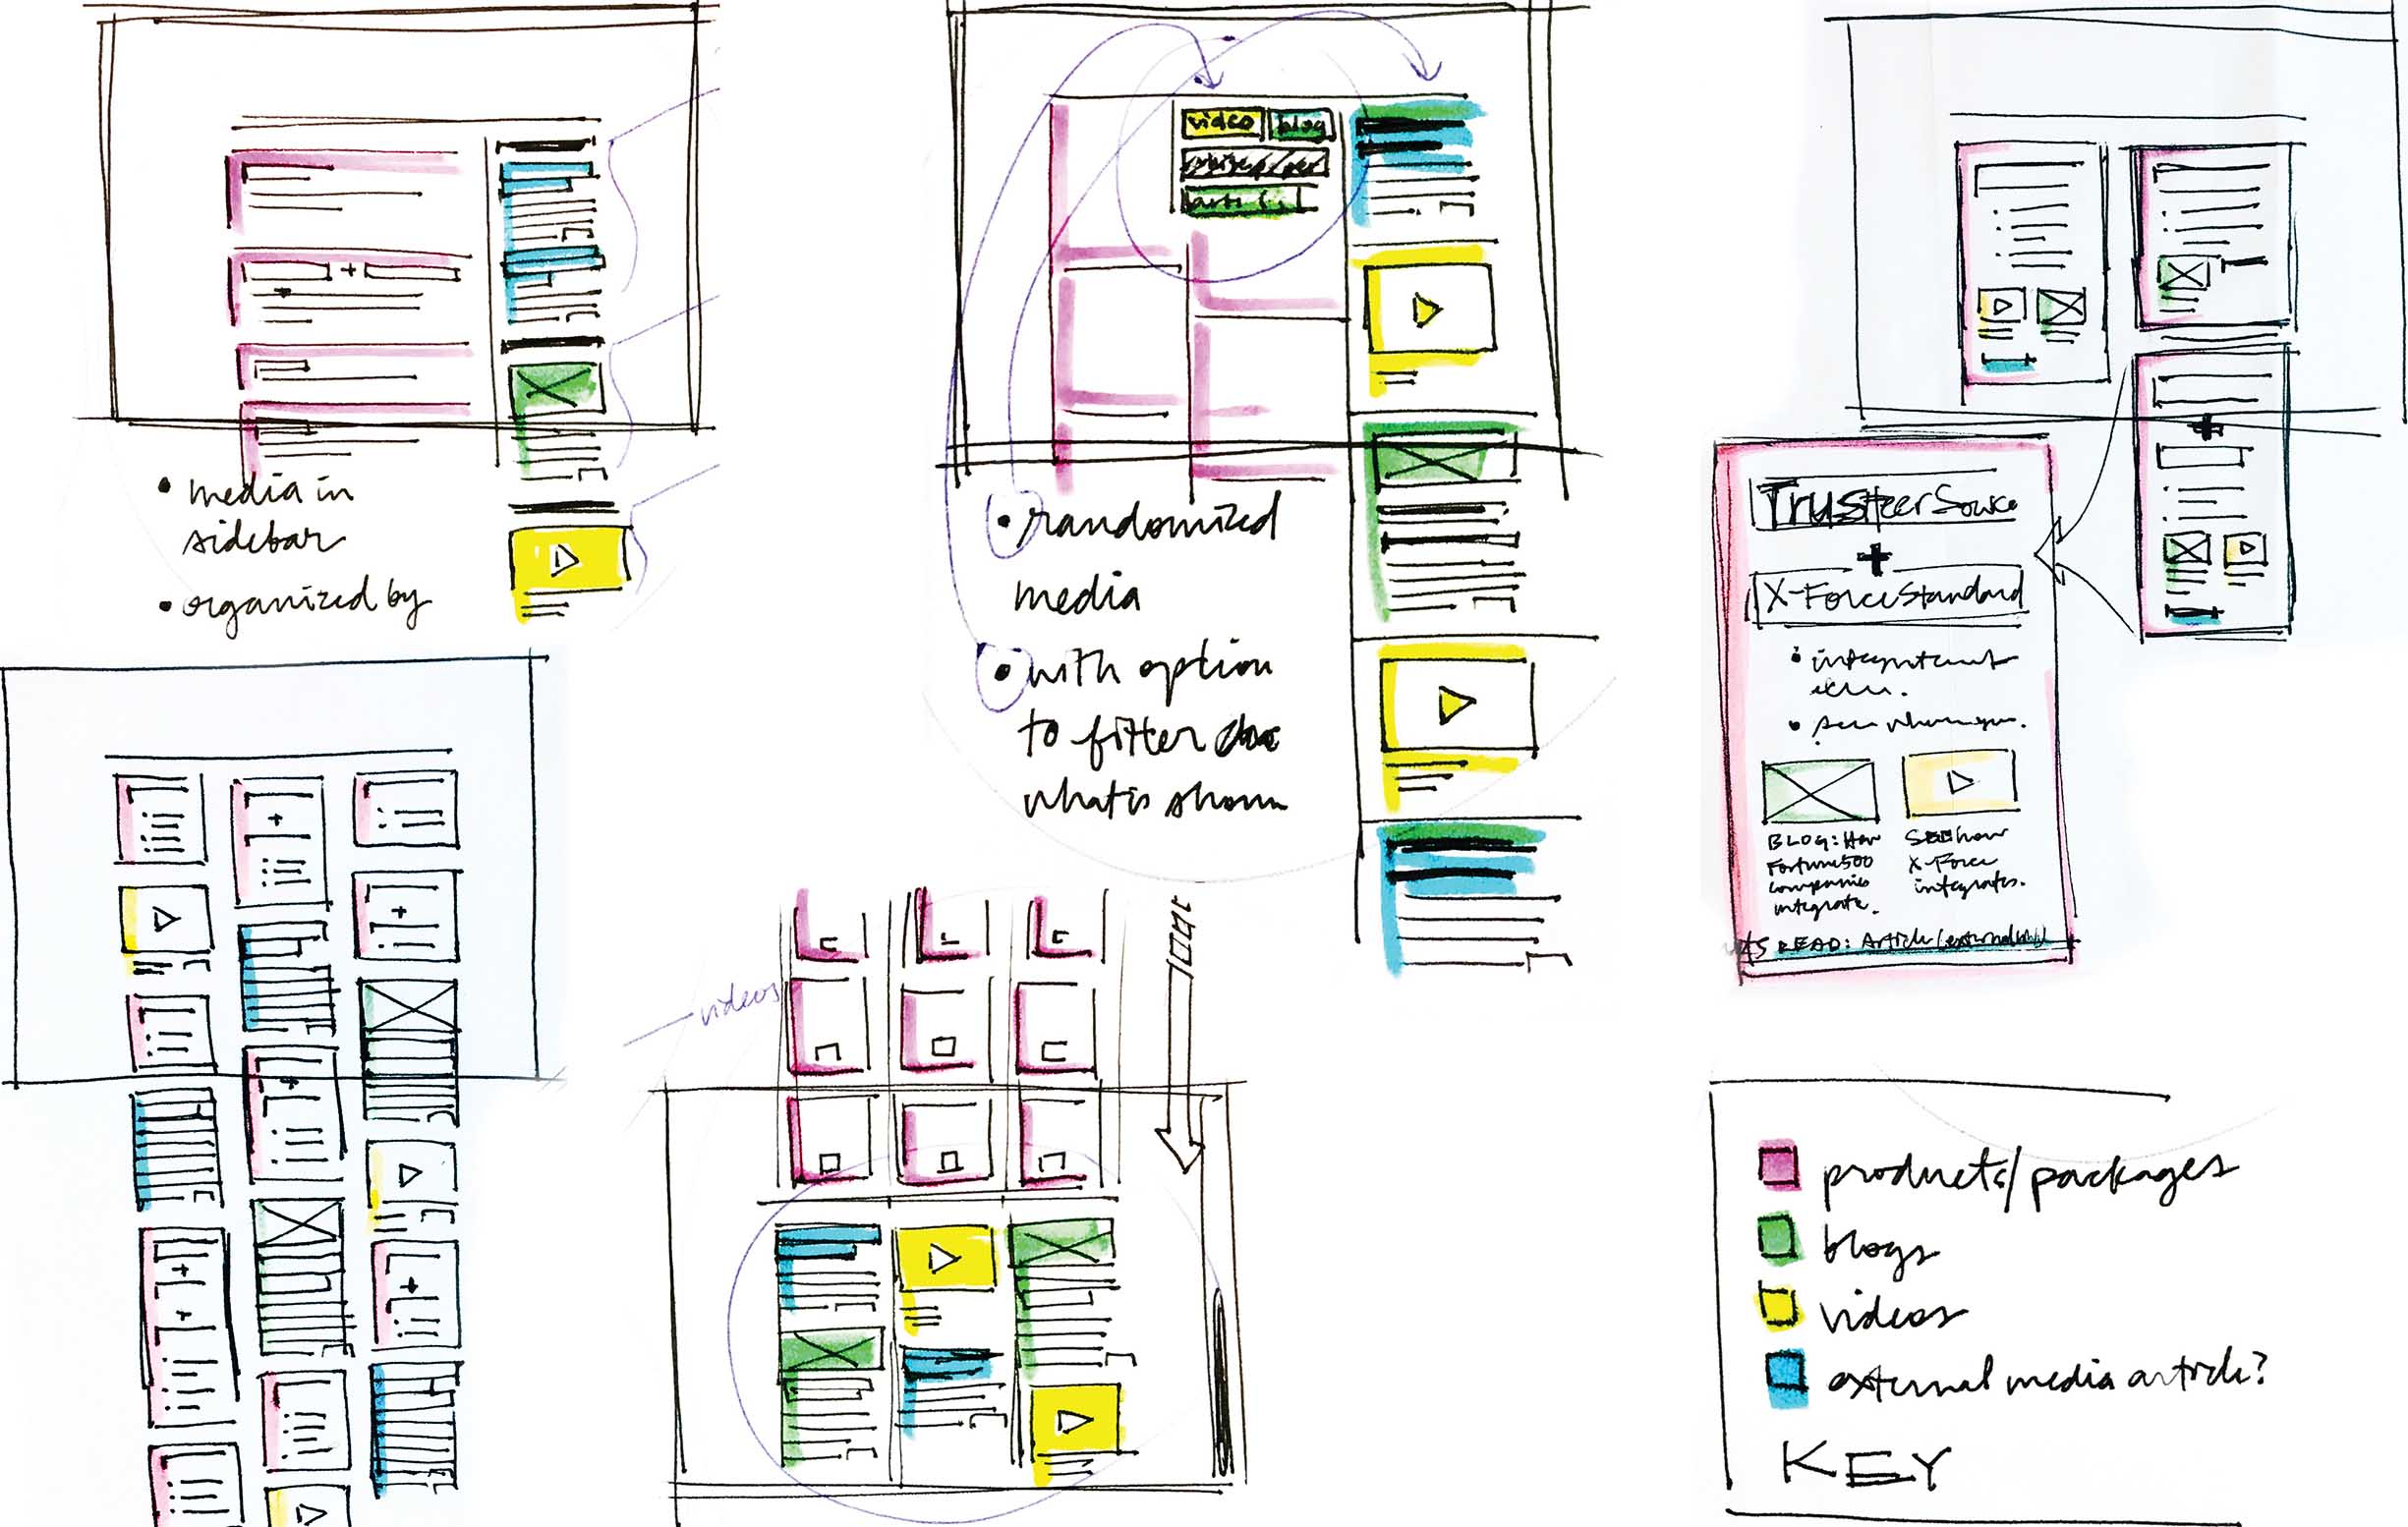 Five mini UI sketches explore layout possibilities to accommodate multiple content types, such as images, videos, and text. Each content type is color-coded consistently across all sketches to aid in comparison.